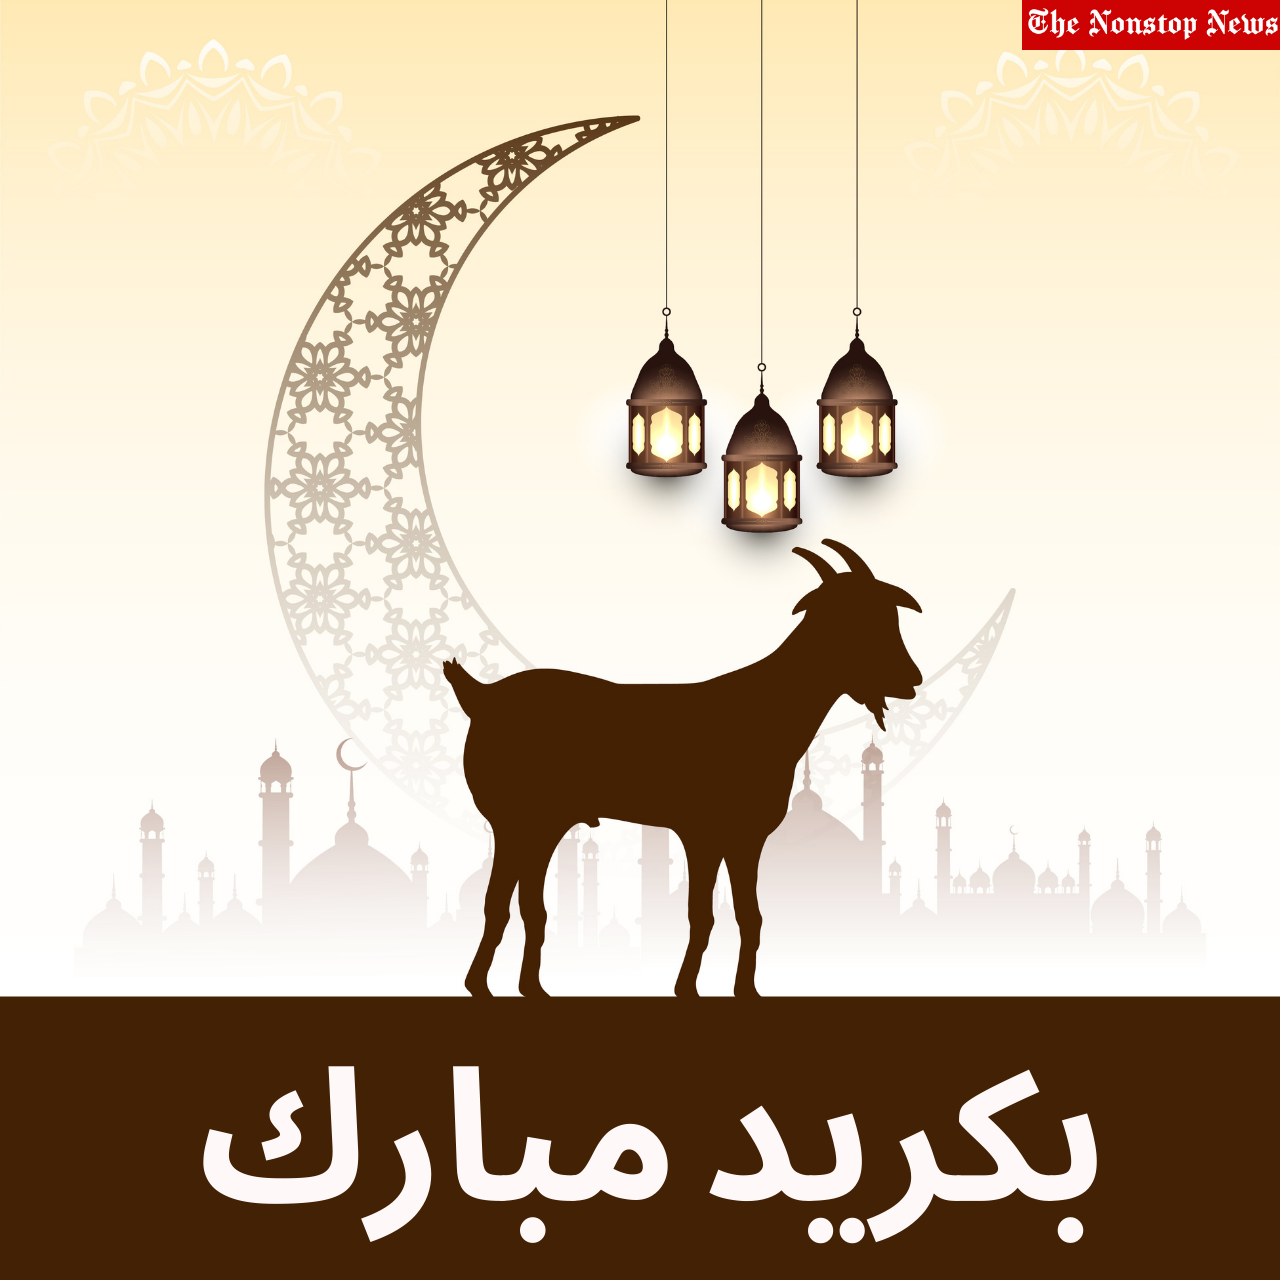 Bakrid Mubarak 2021 Arabic Wishes, Images, Quotes, Greetings, Status, Messages, and Dua to greet your Friend, Relative, or Loved Ones on Eid Al-Adha